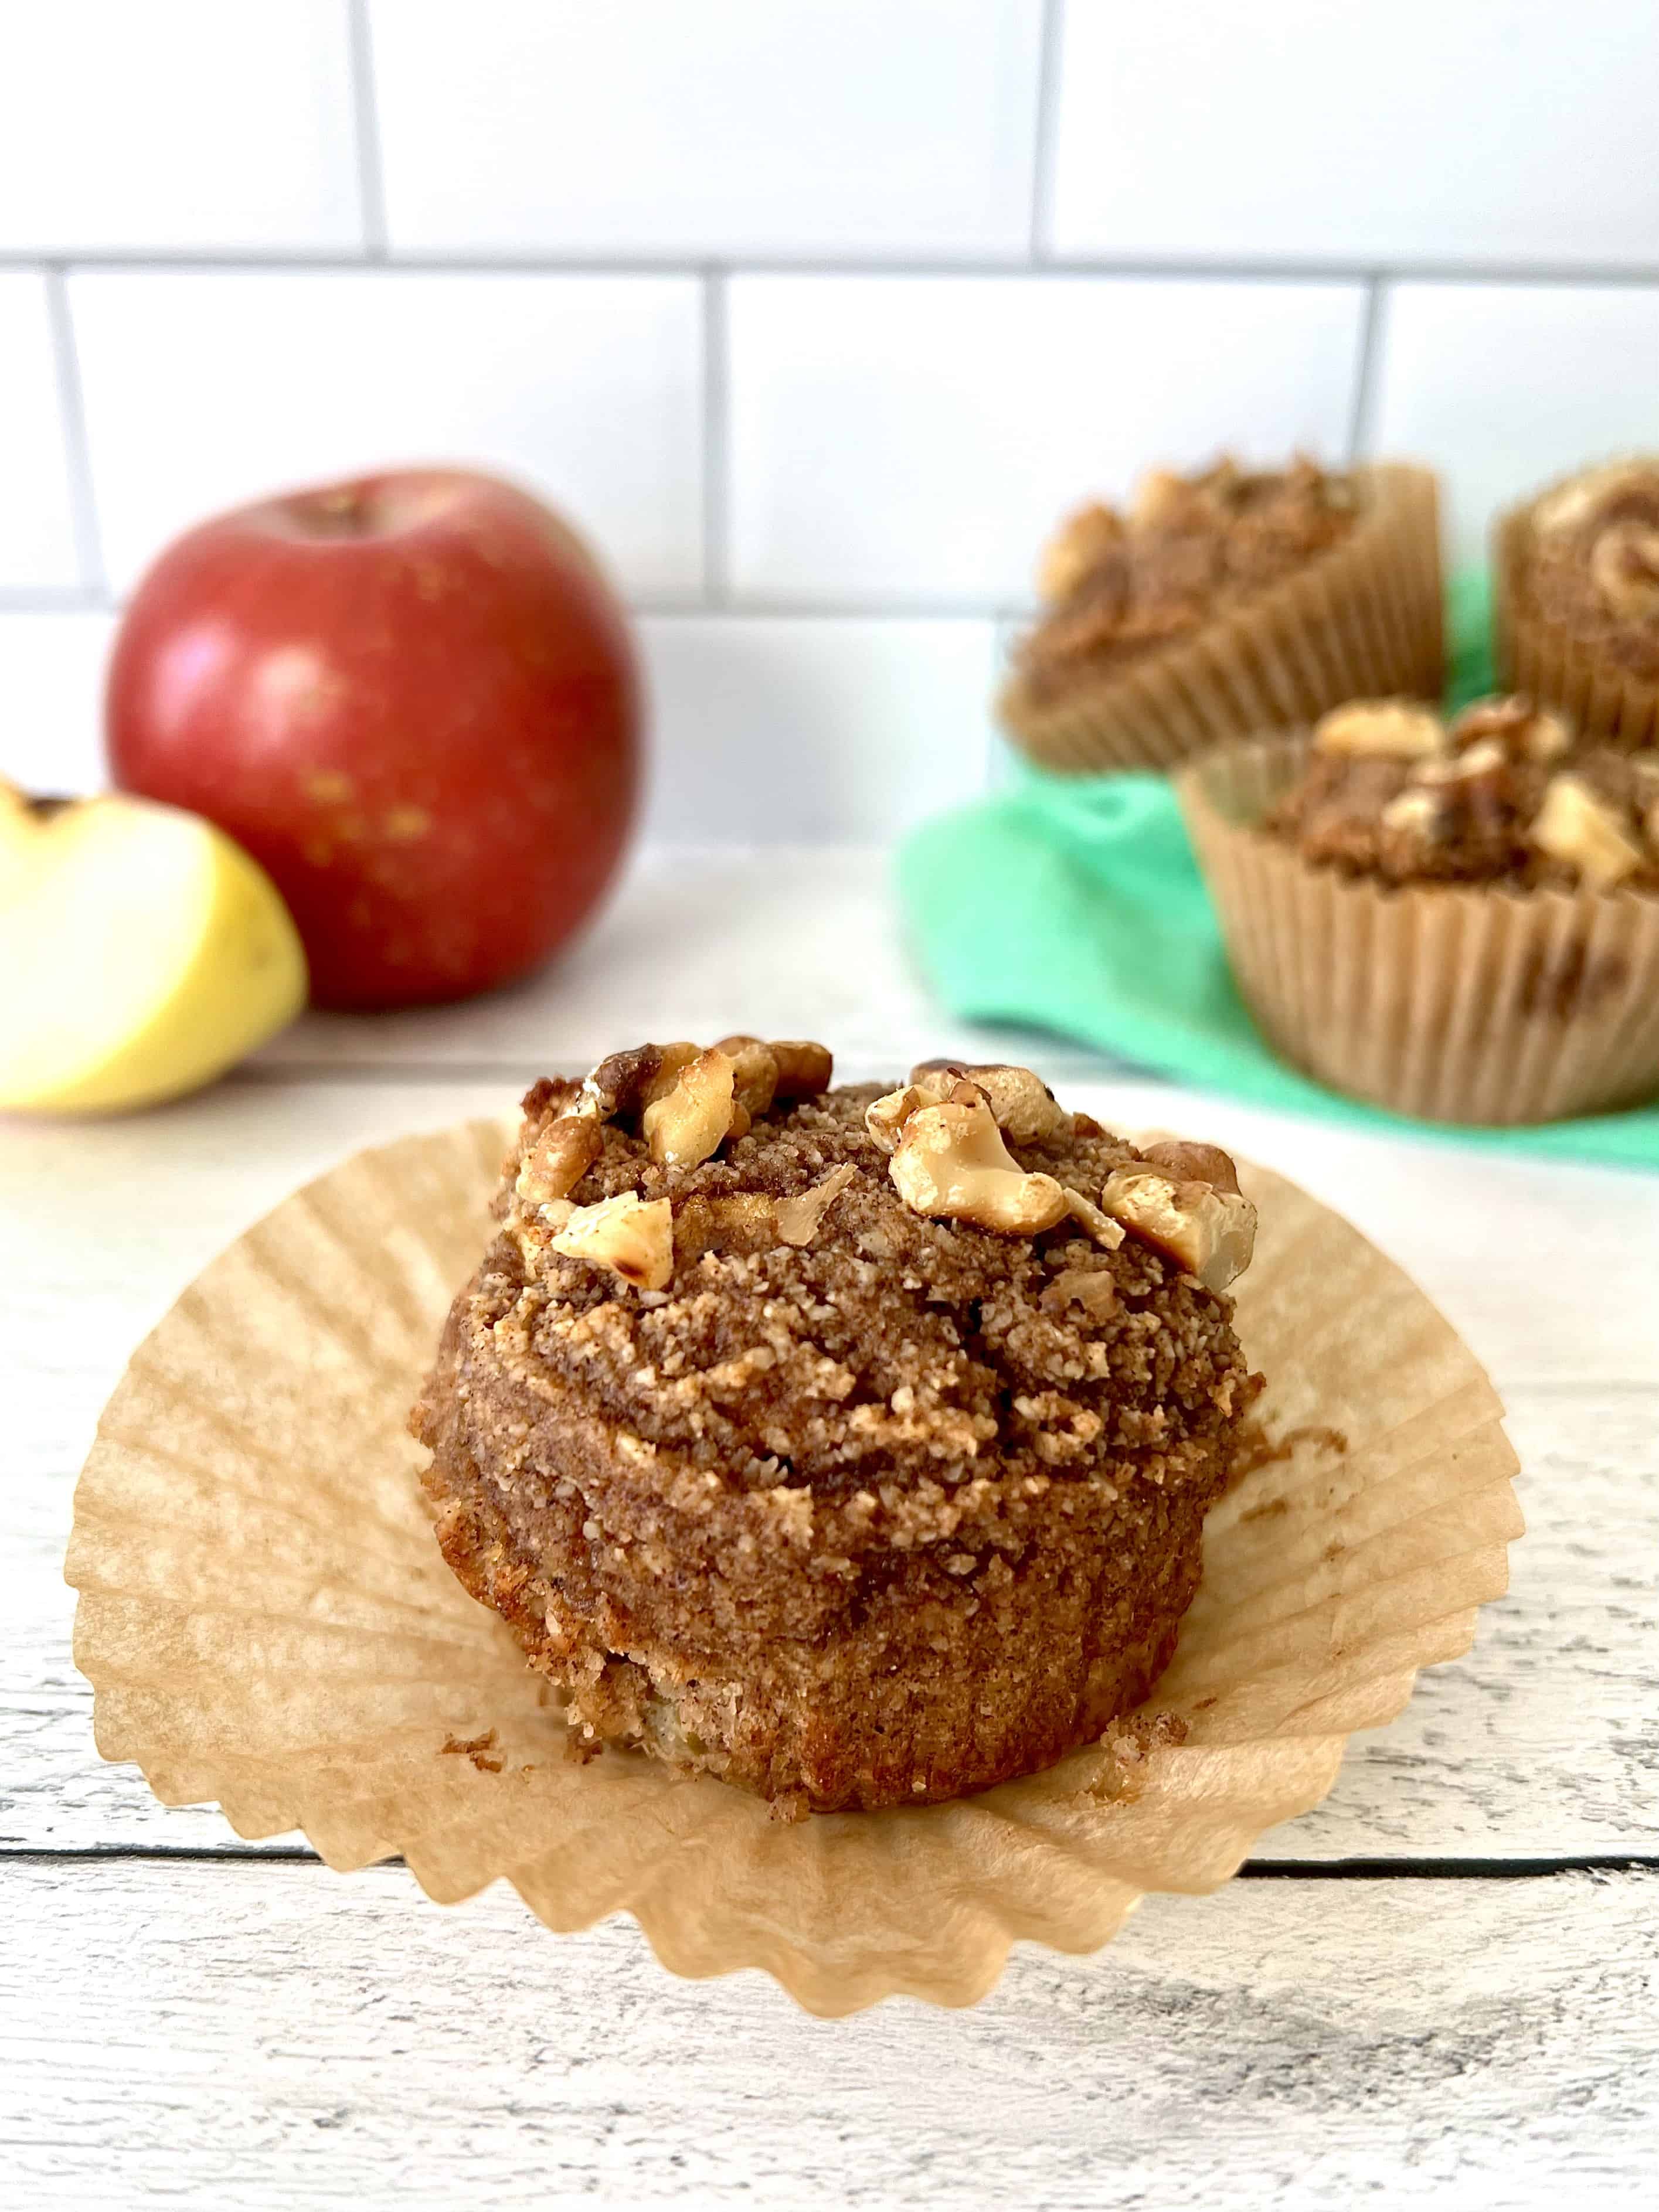 An Paleo muffin with apple chunks and walnuts on top on a white wooden table with its muffin liner pulled away